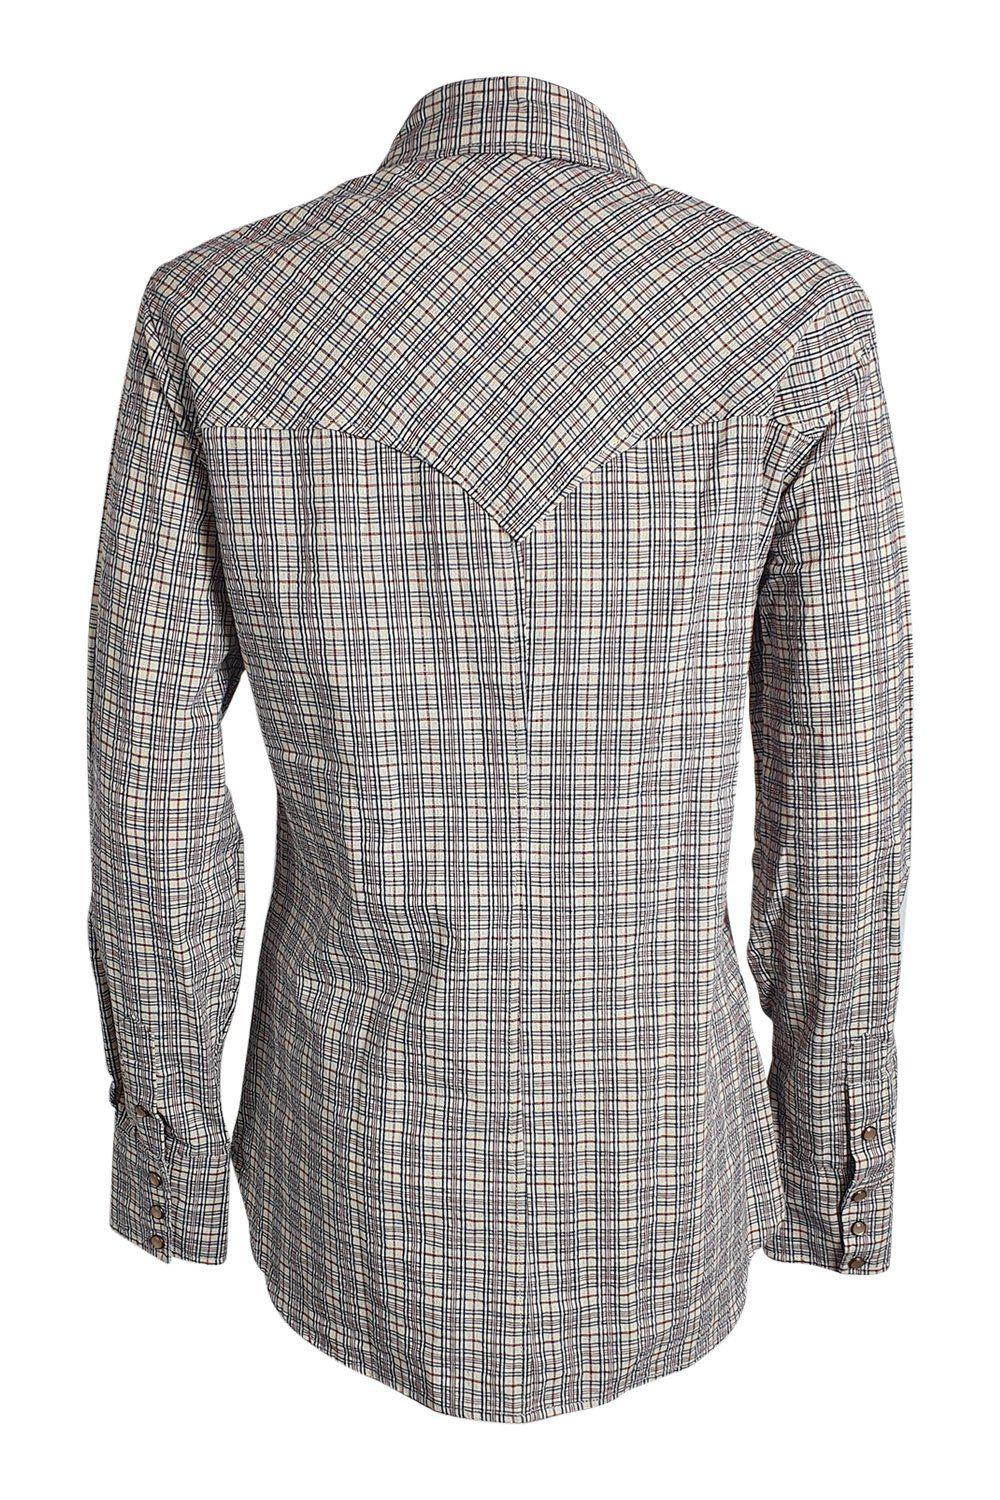 ISABEL MARANT 100% Cotton Pink Grey Checked Cowgirl Style Shirt (38)-Isabel Marant-The Freperie